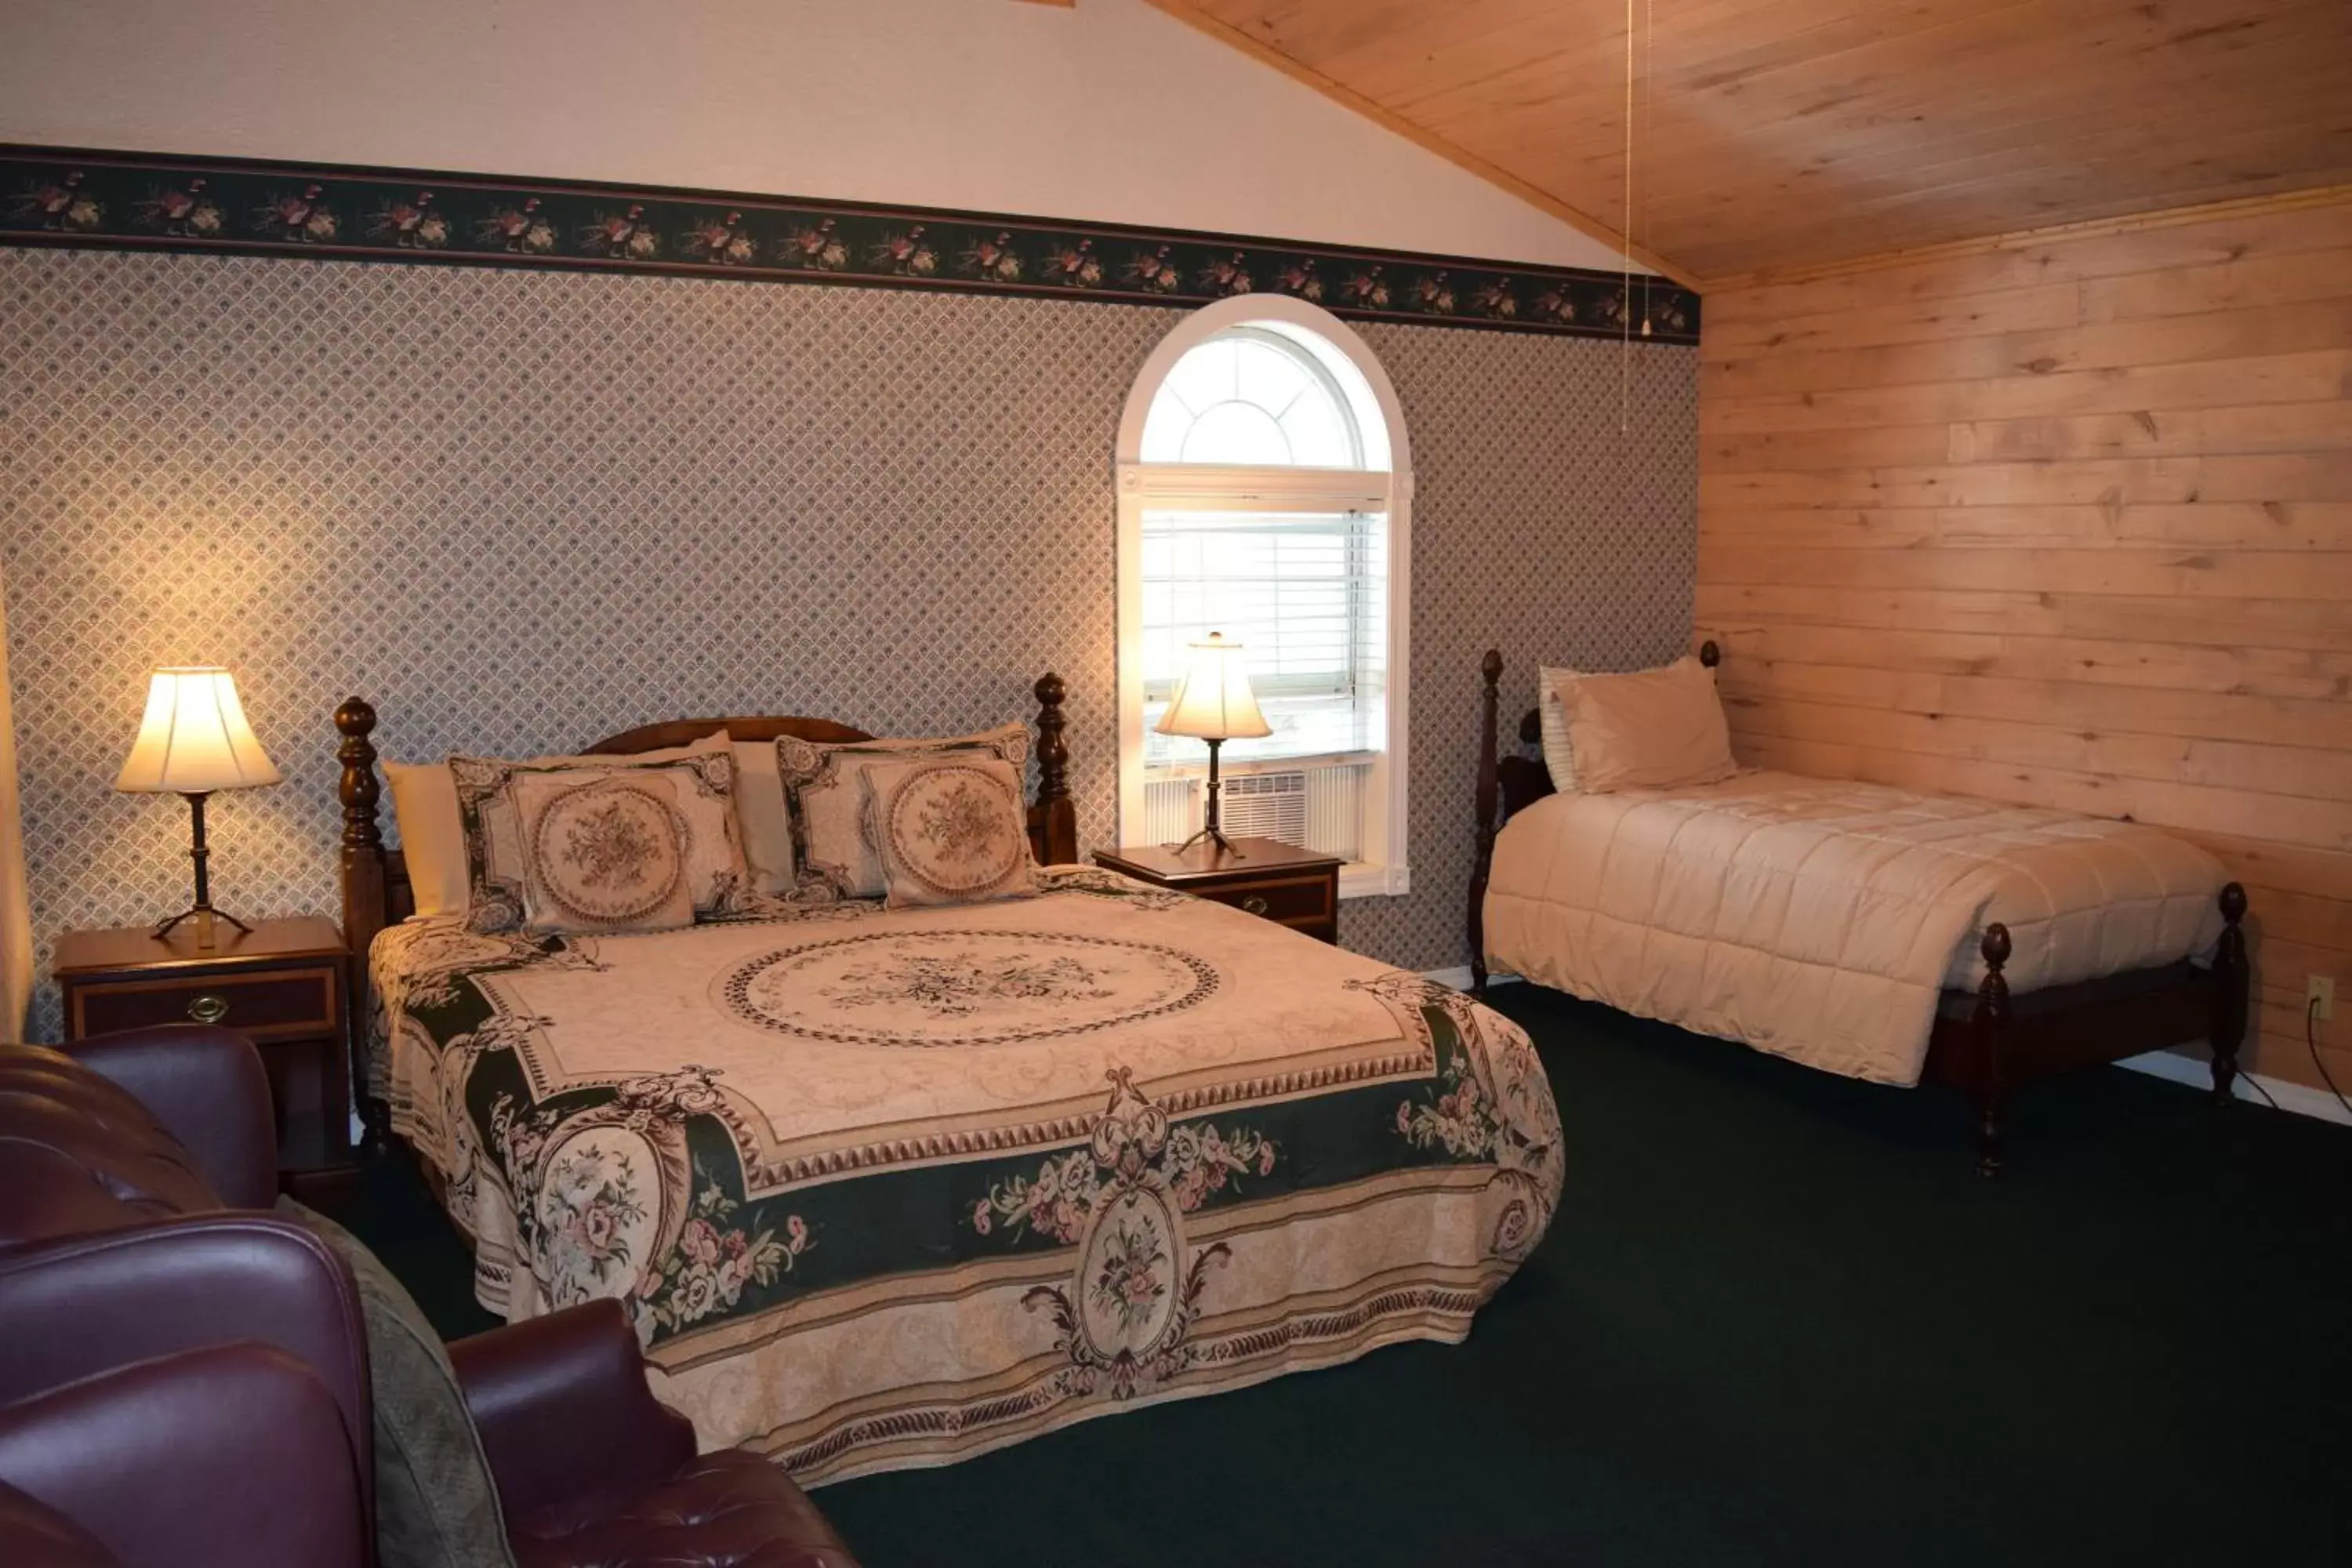 02 - King Suite with Private Bathroom - The Corbin Room in Grist Mill Inn